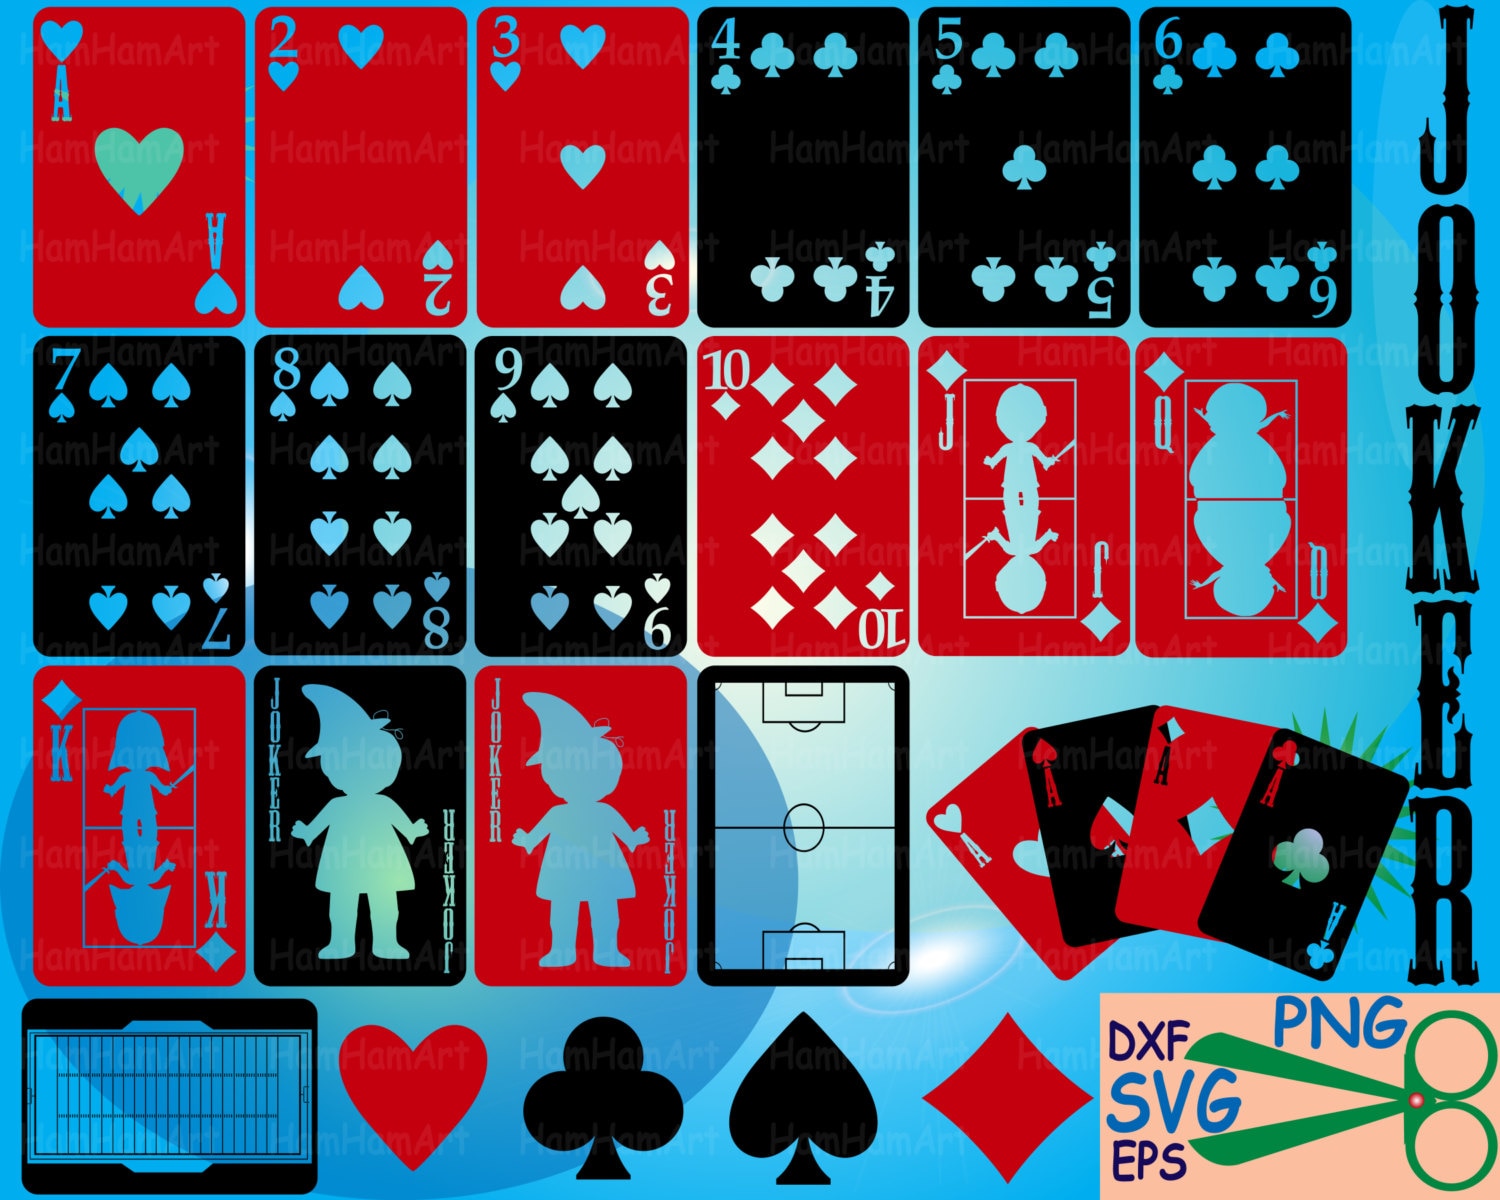 Download Poker Playing cards clip art suits casino games Cutting SVG